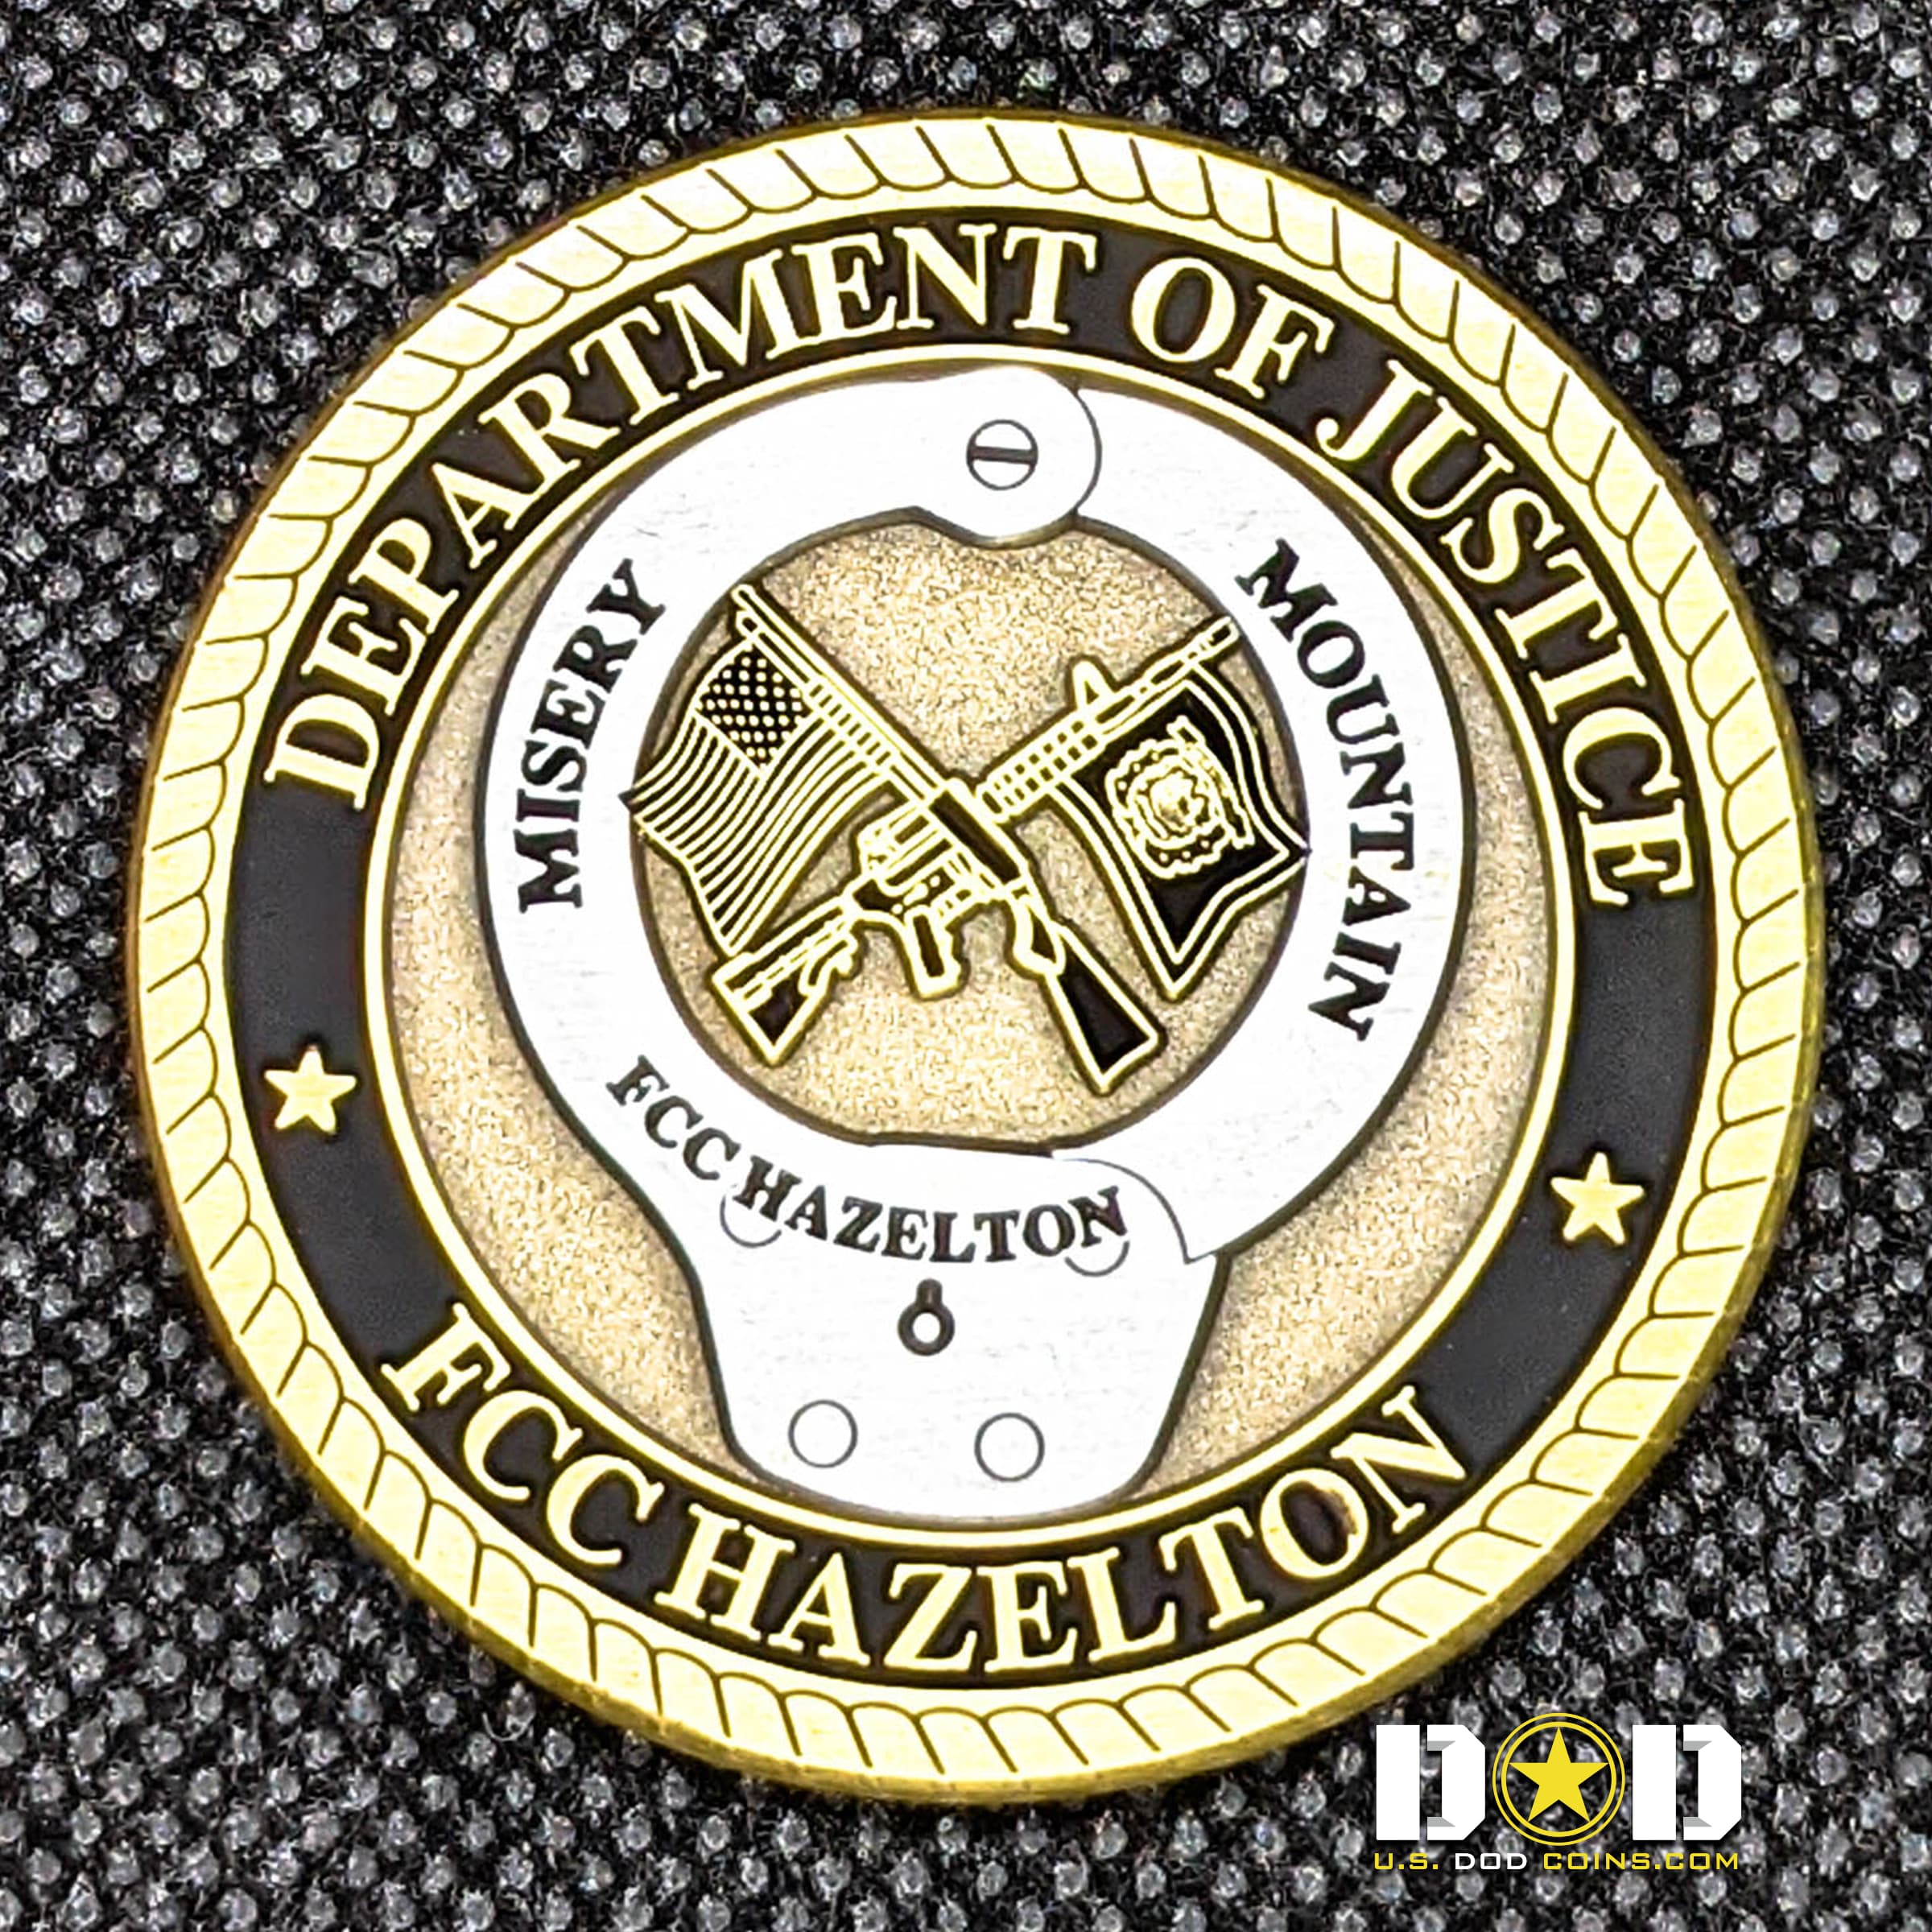 Department-of-Justice-FCC-Hazelton-Challenge-Coin_0000_USDODCoins-Challenge-Coins-Examples-26